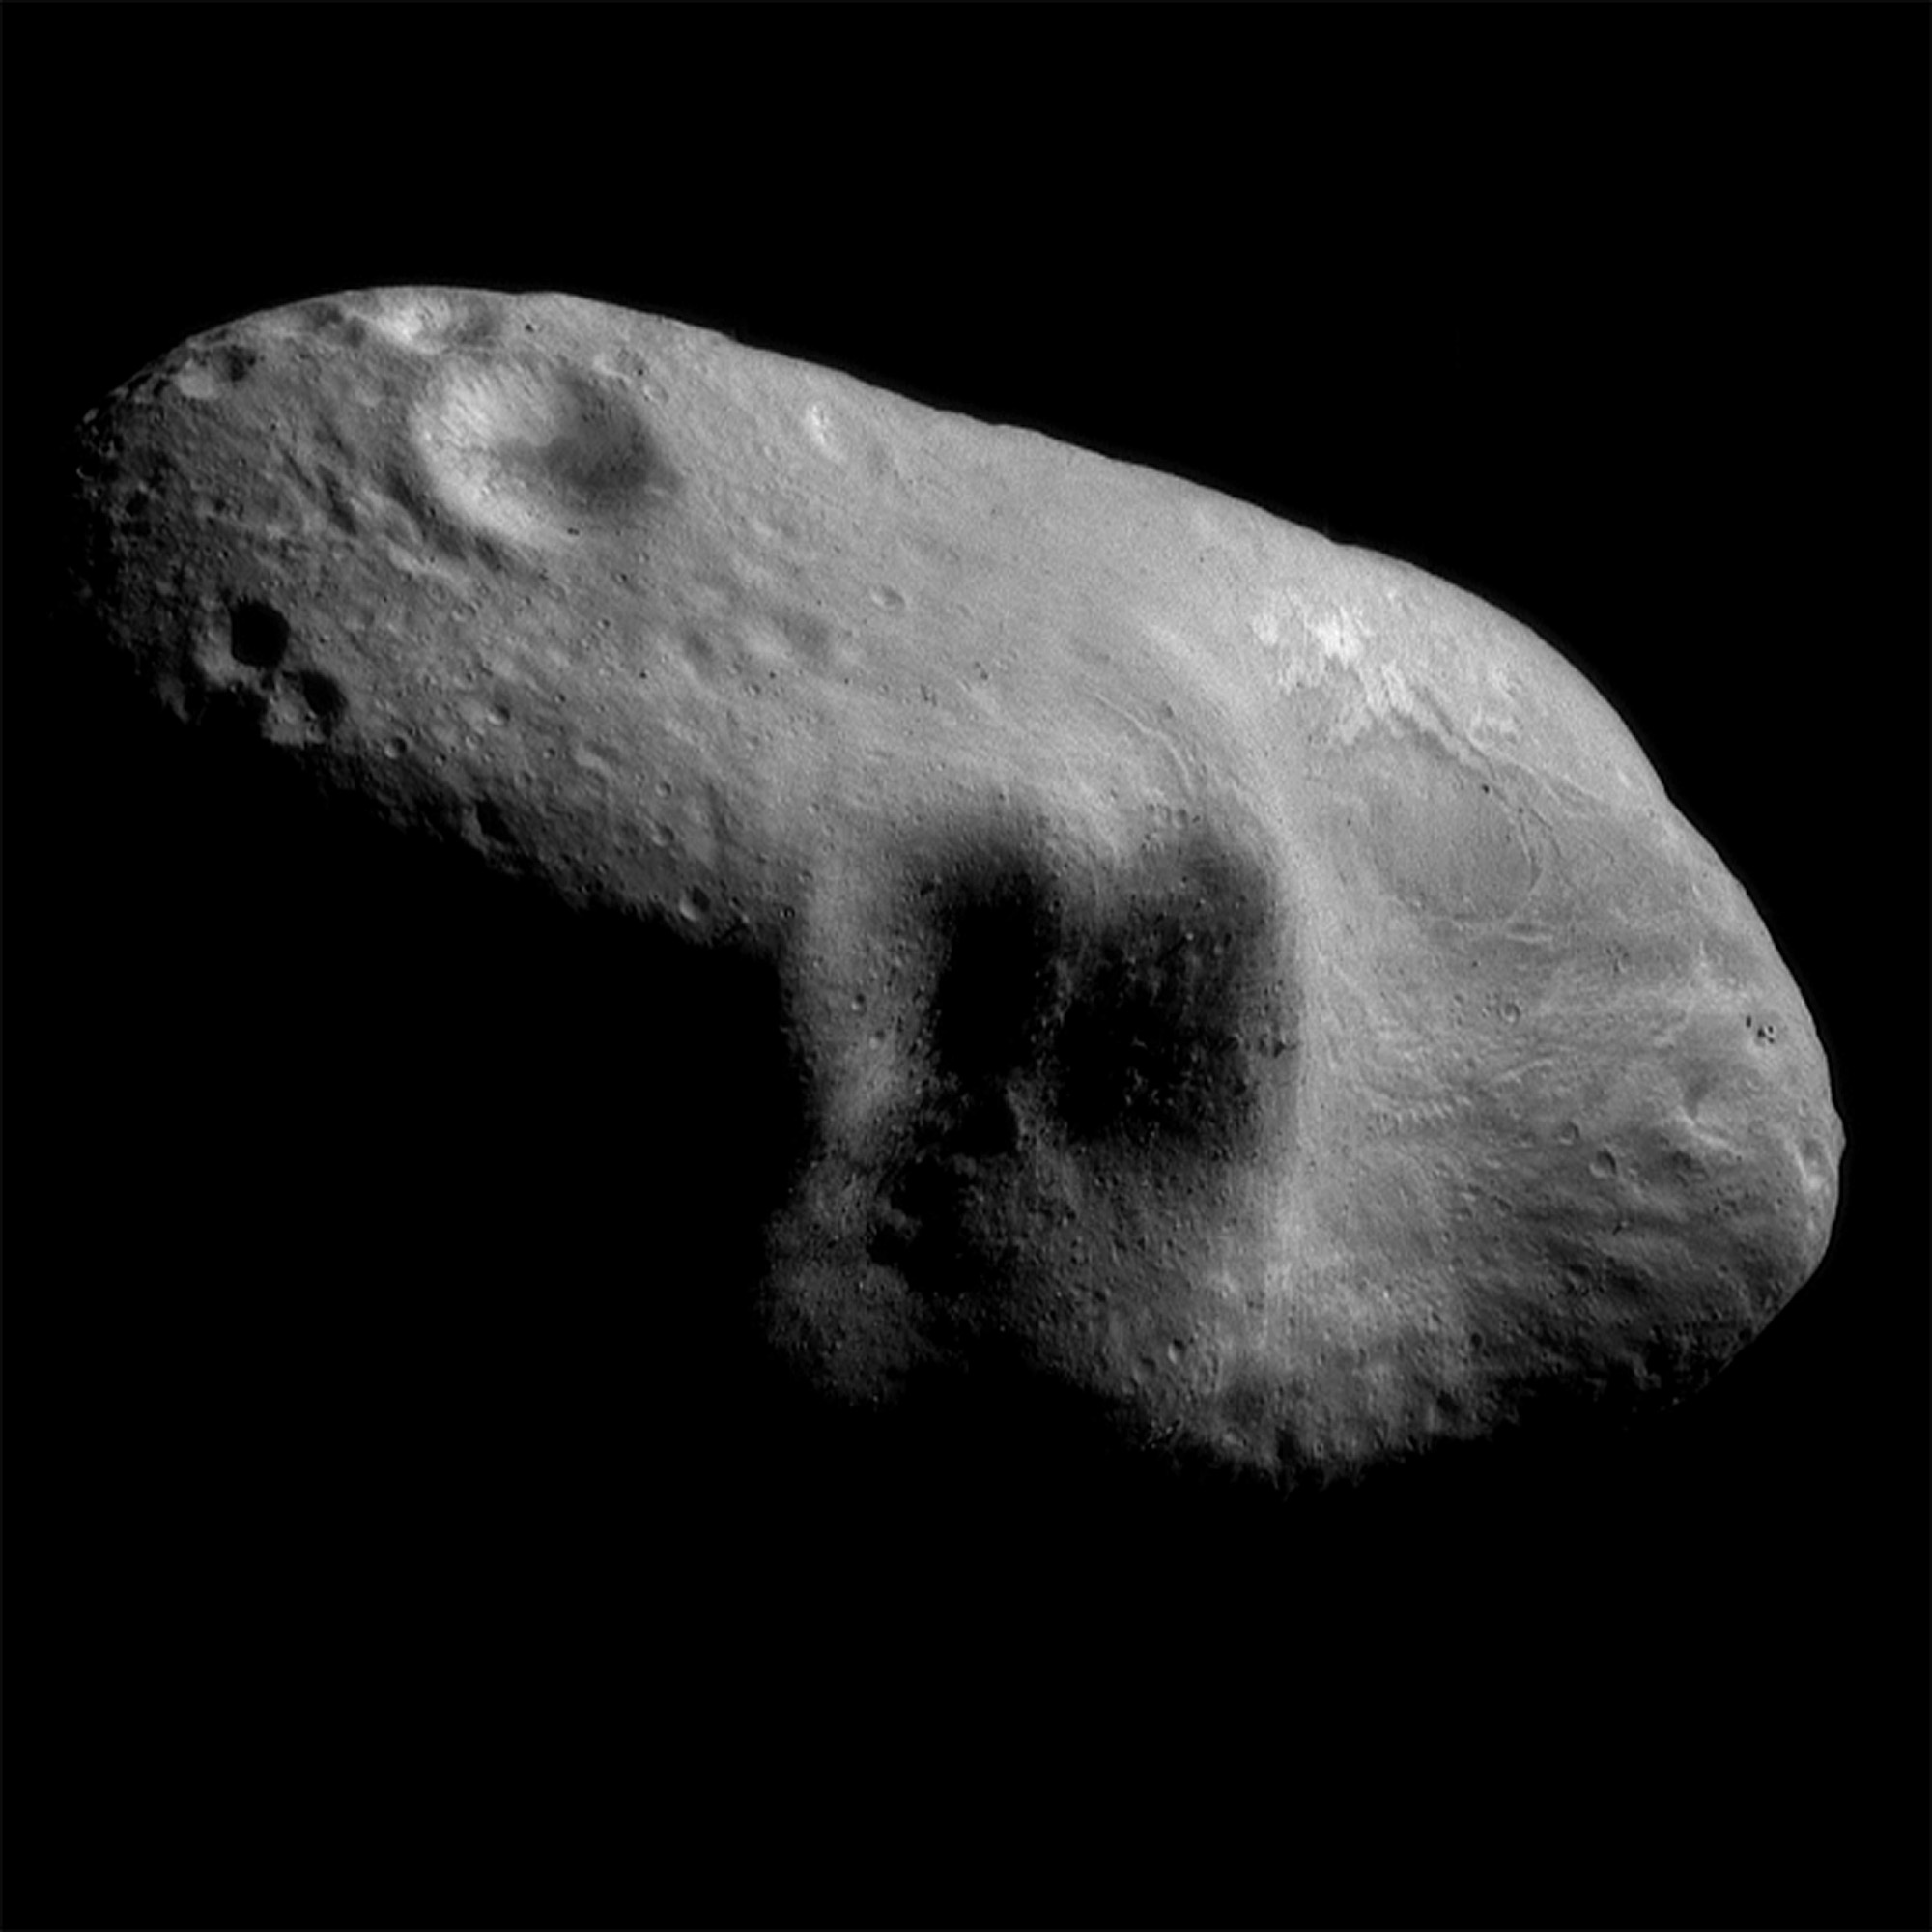 The asteroid Eros: So...not exactly Mars